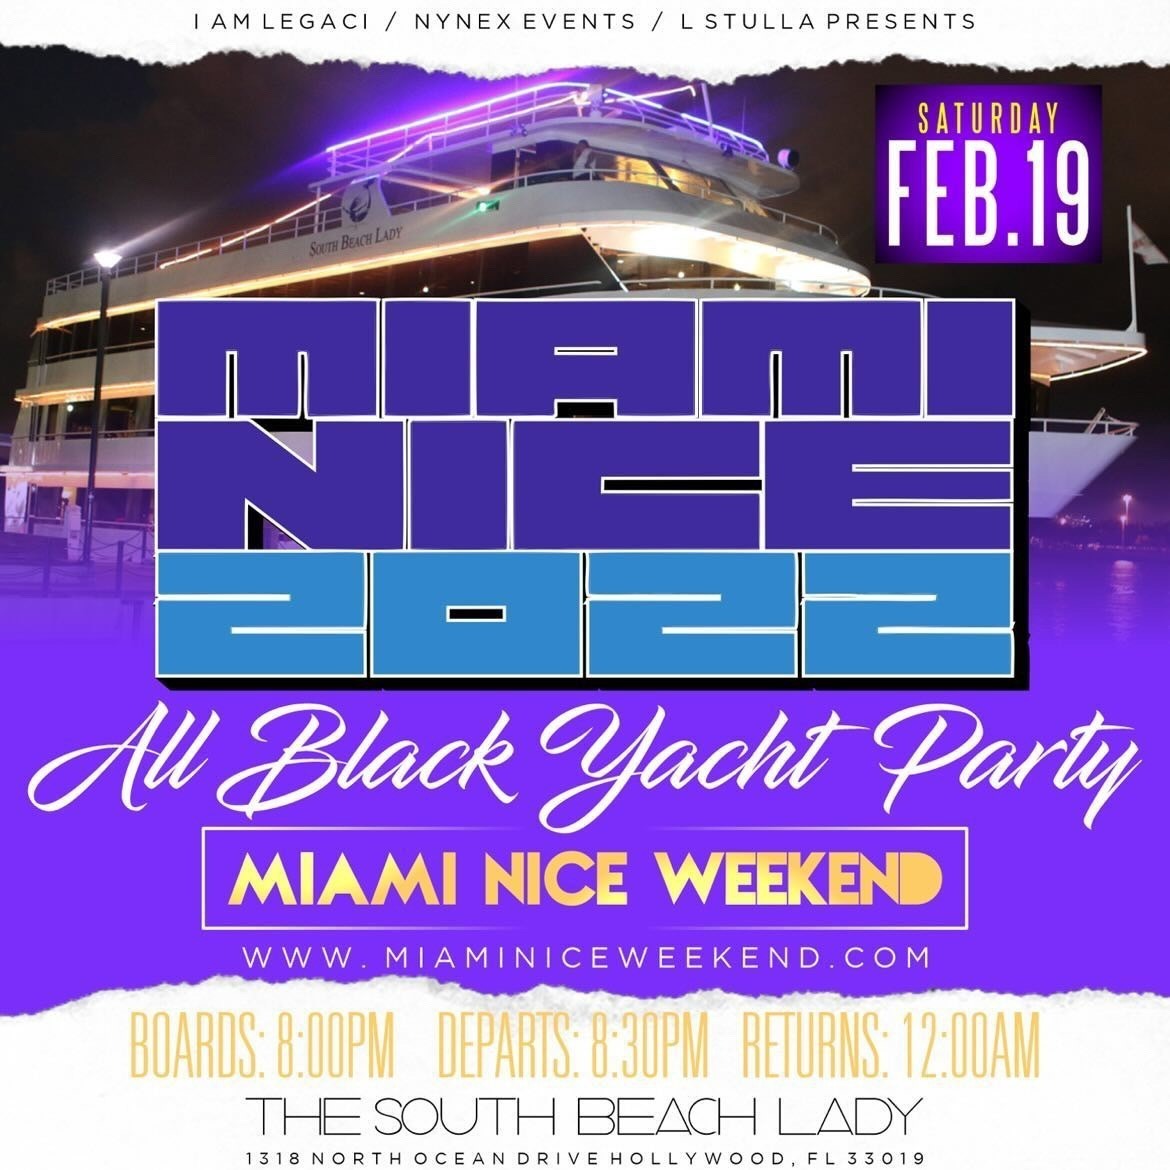 MIAMI NICE 2022 PRESIDENT'S DAY WEEKEND ALL BLACK YACHT PARTY